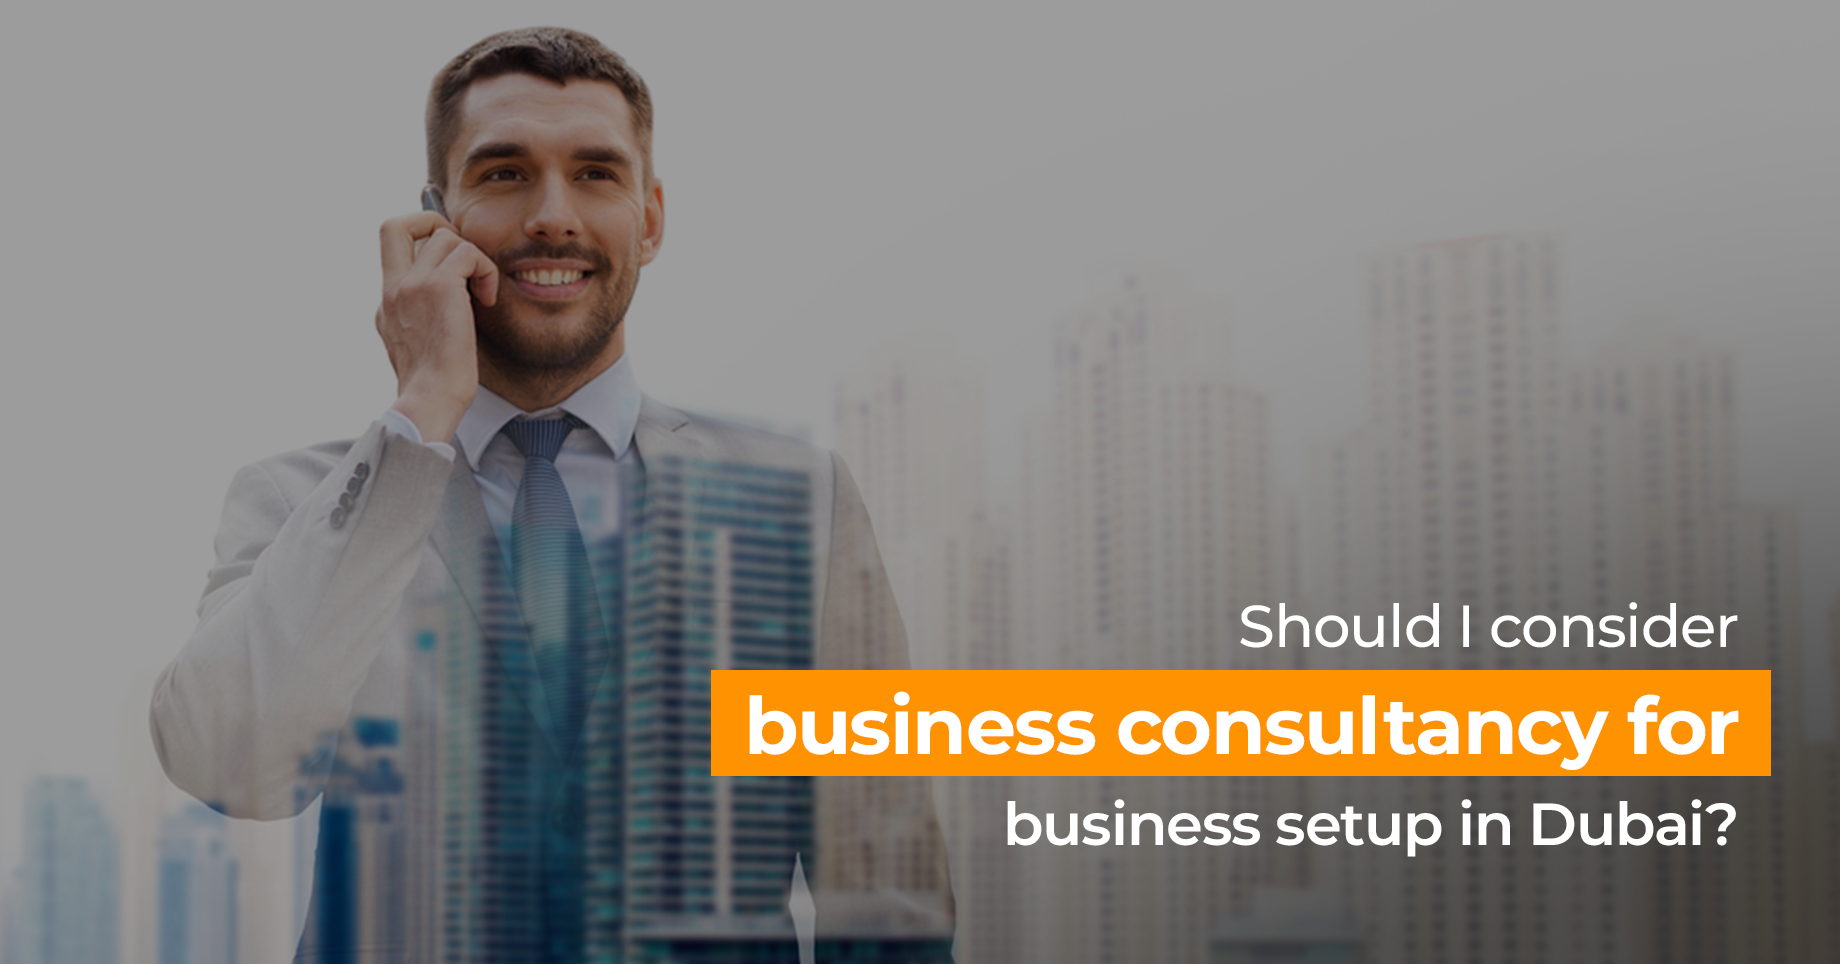 Business Consultancy for Business Setup in Dubai